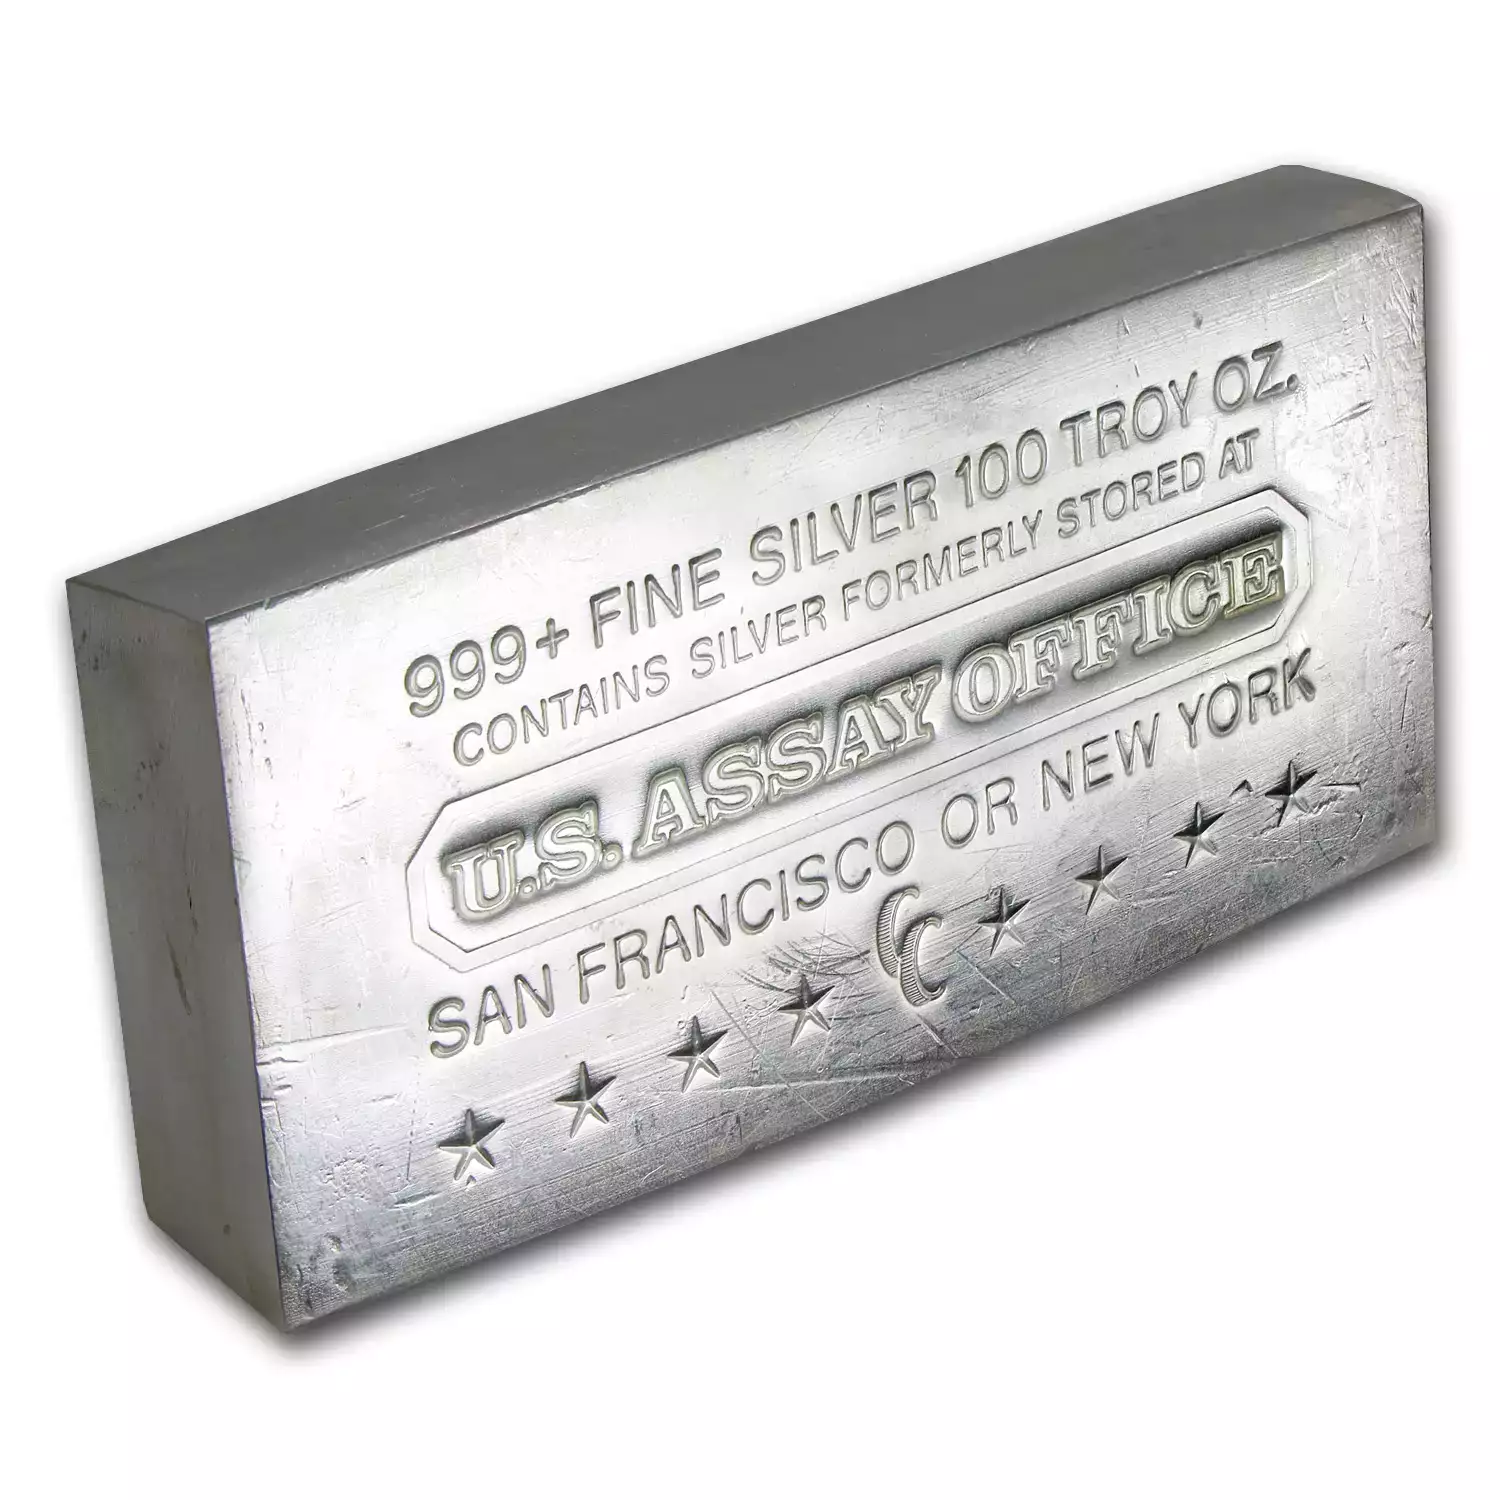 100oz Silver Bar - US Assay Office - Stout Gold and Silver